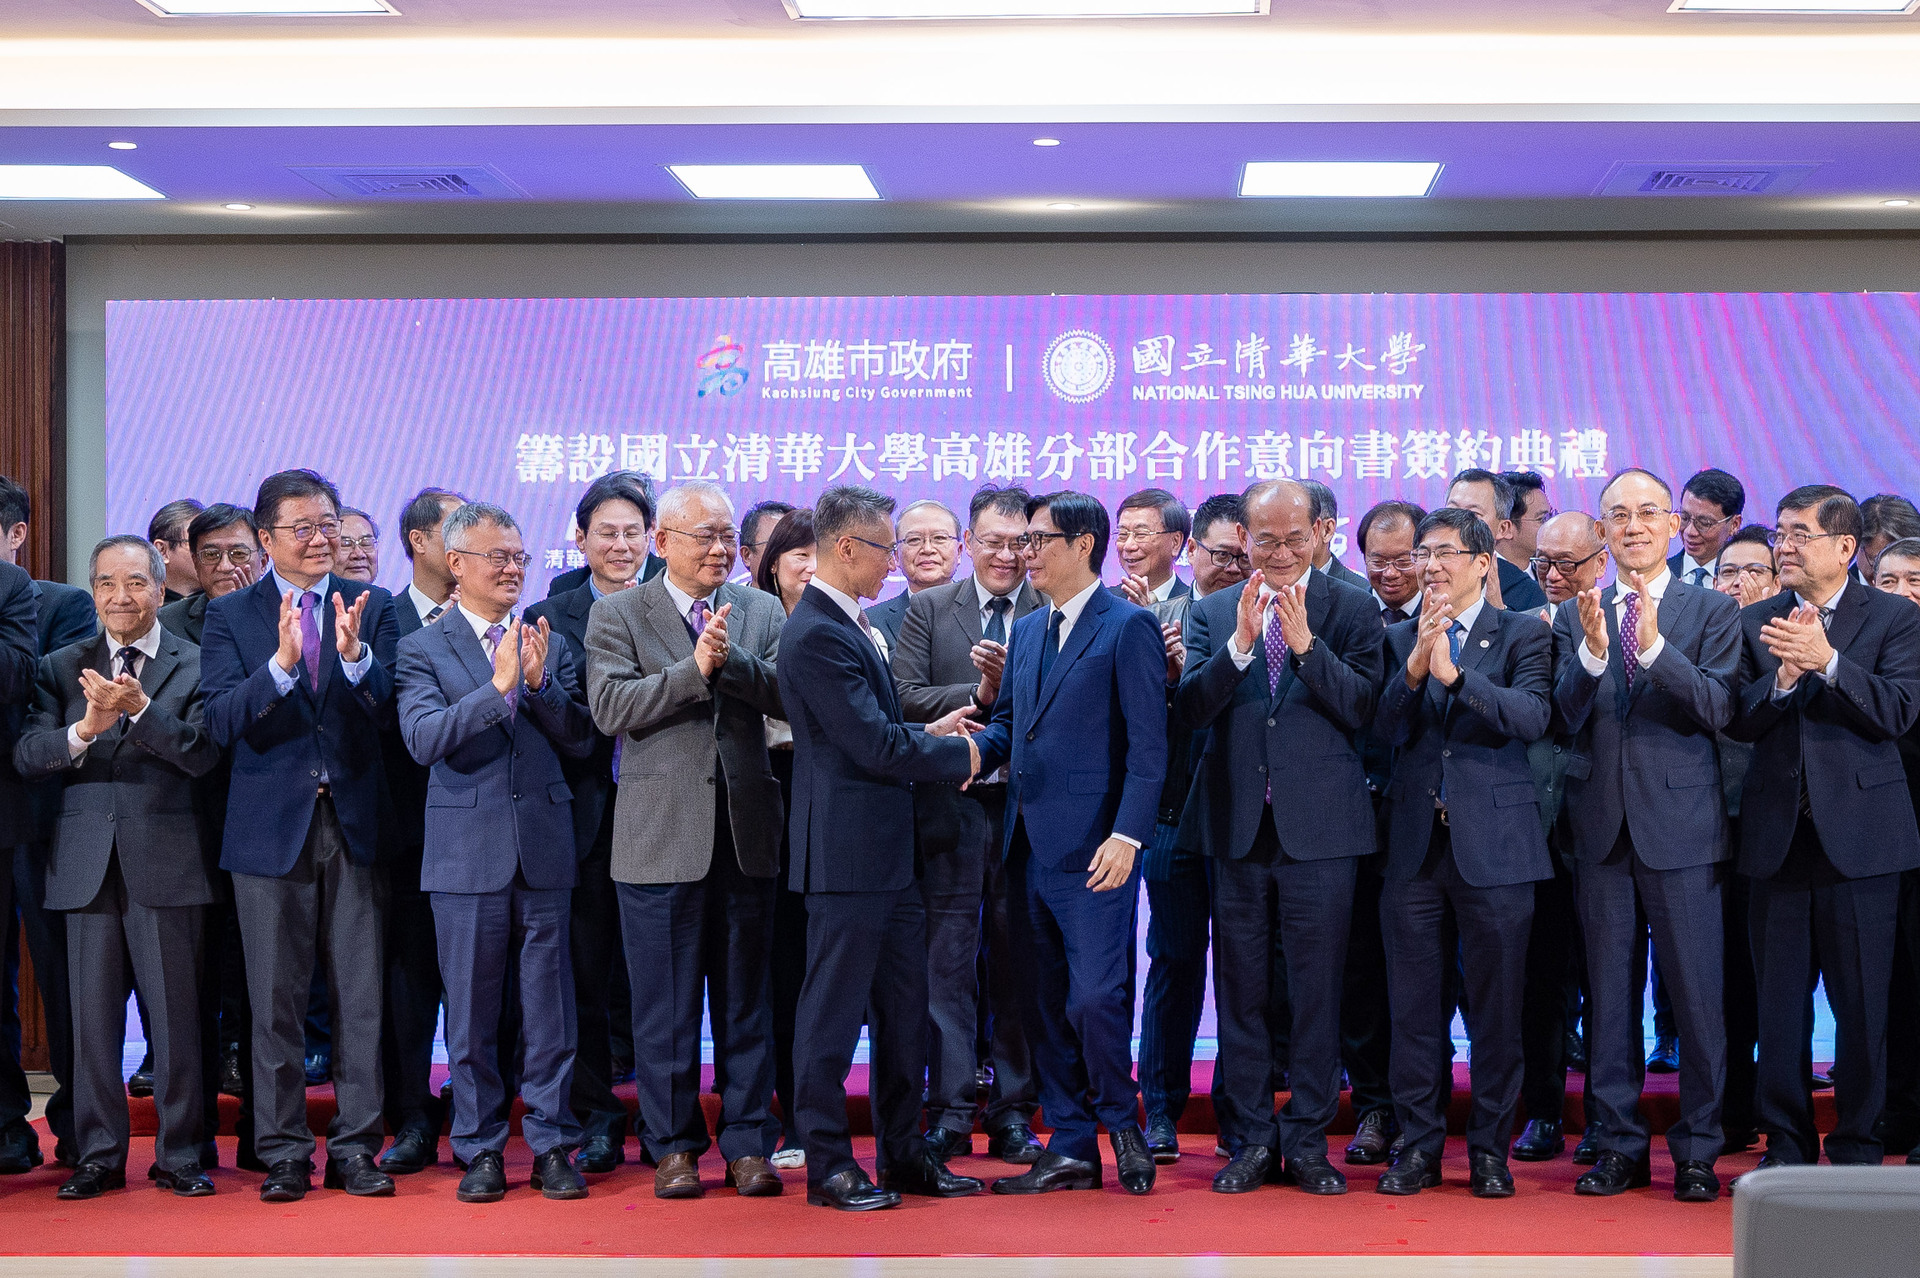 President W. John Kao (高為元) and Kaohsiung Mayor Chi-Mai Chen (陳其邁) signed a memorandum of understanding at the Kaohsiung City Government, announcing the establishment of the